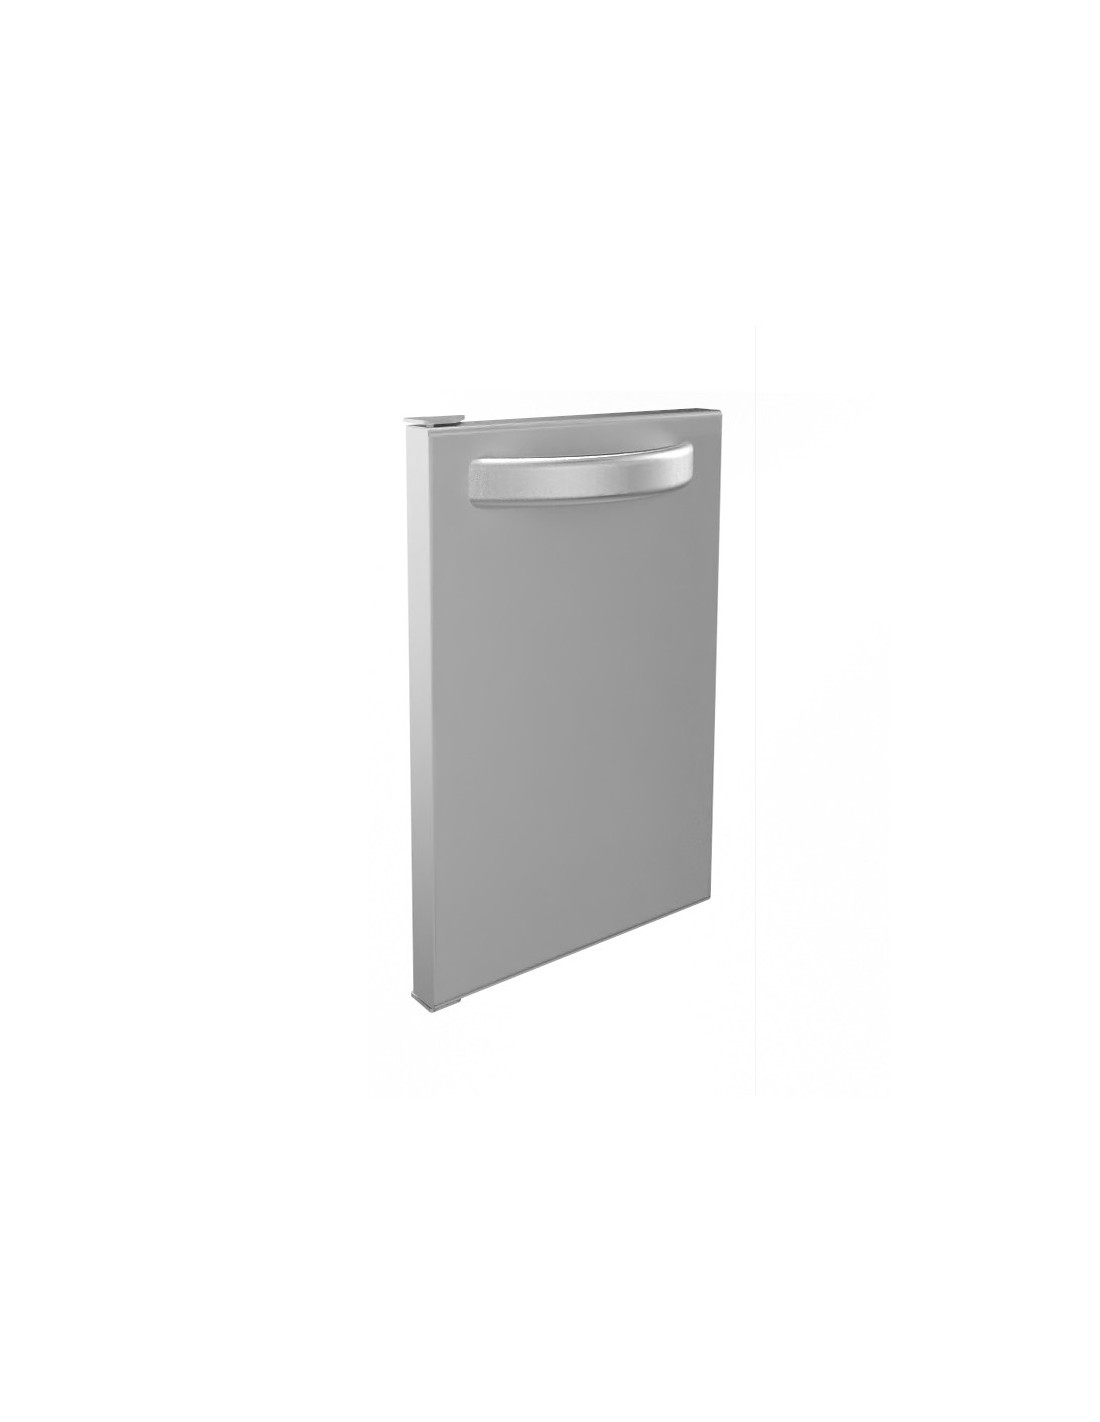 Hinged door with athermal handle and M30 magnetic closure